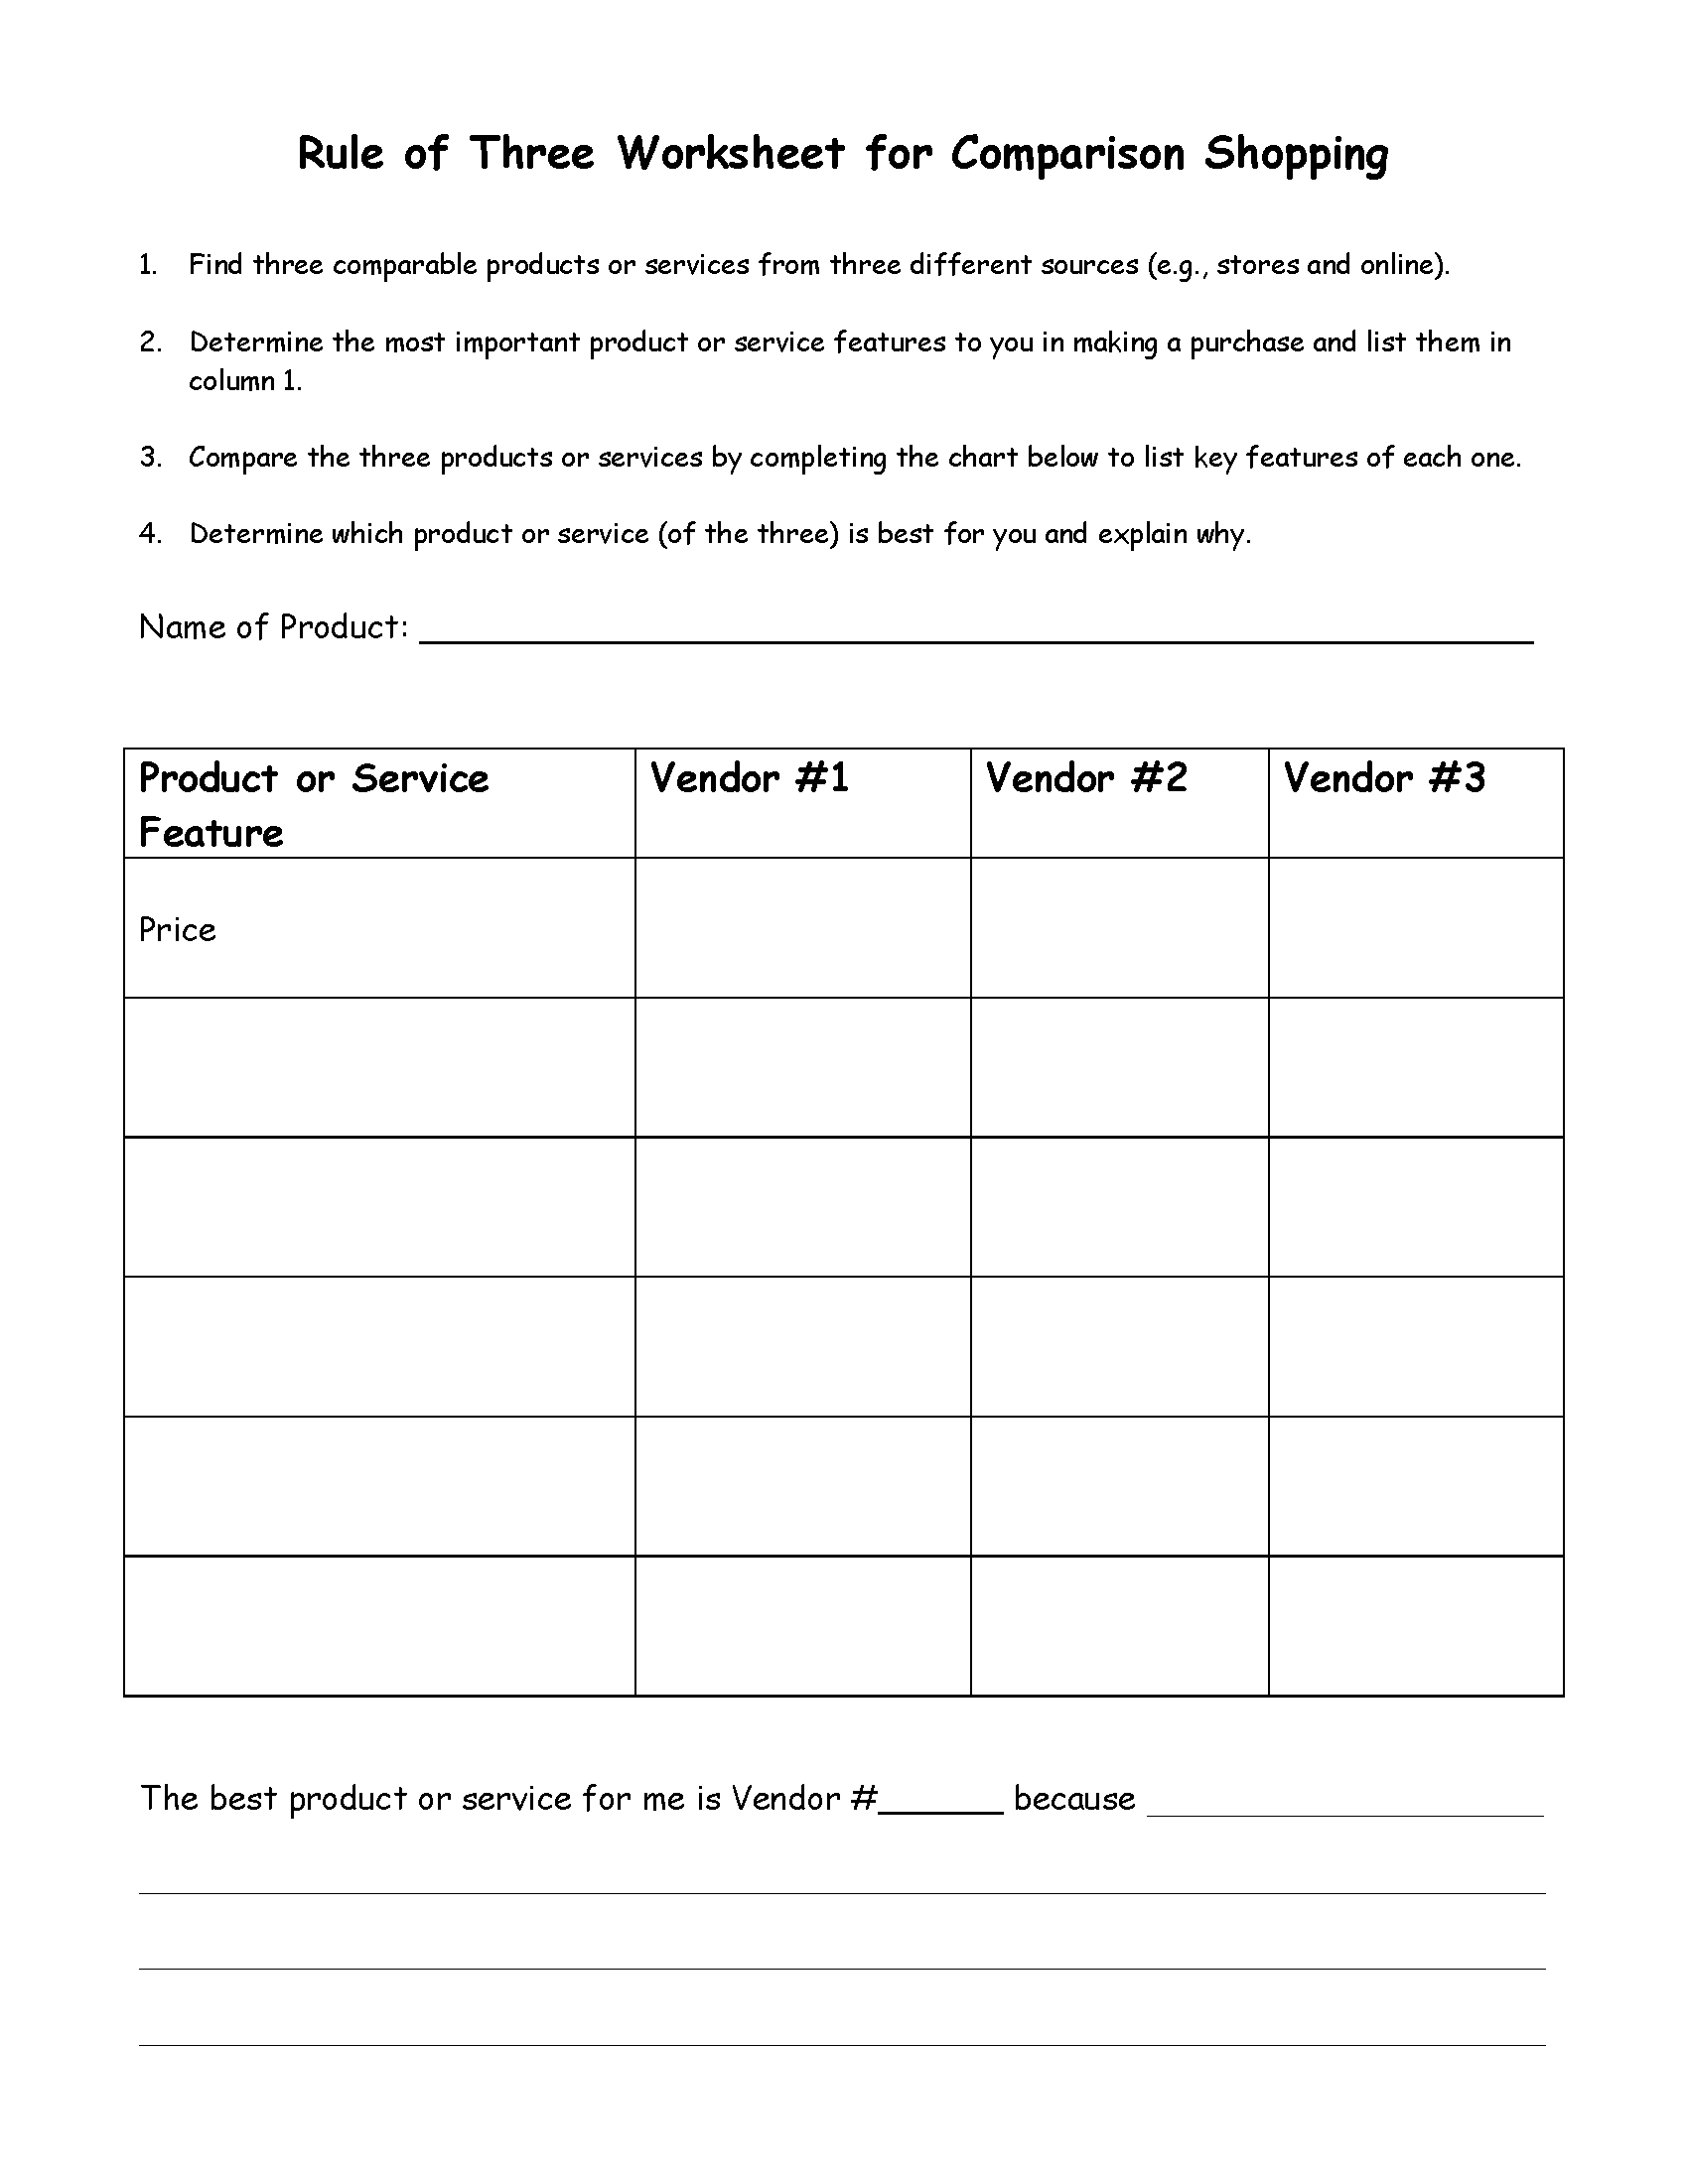 Rule of 3 for Comparison Shopping Worksheet